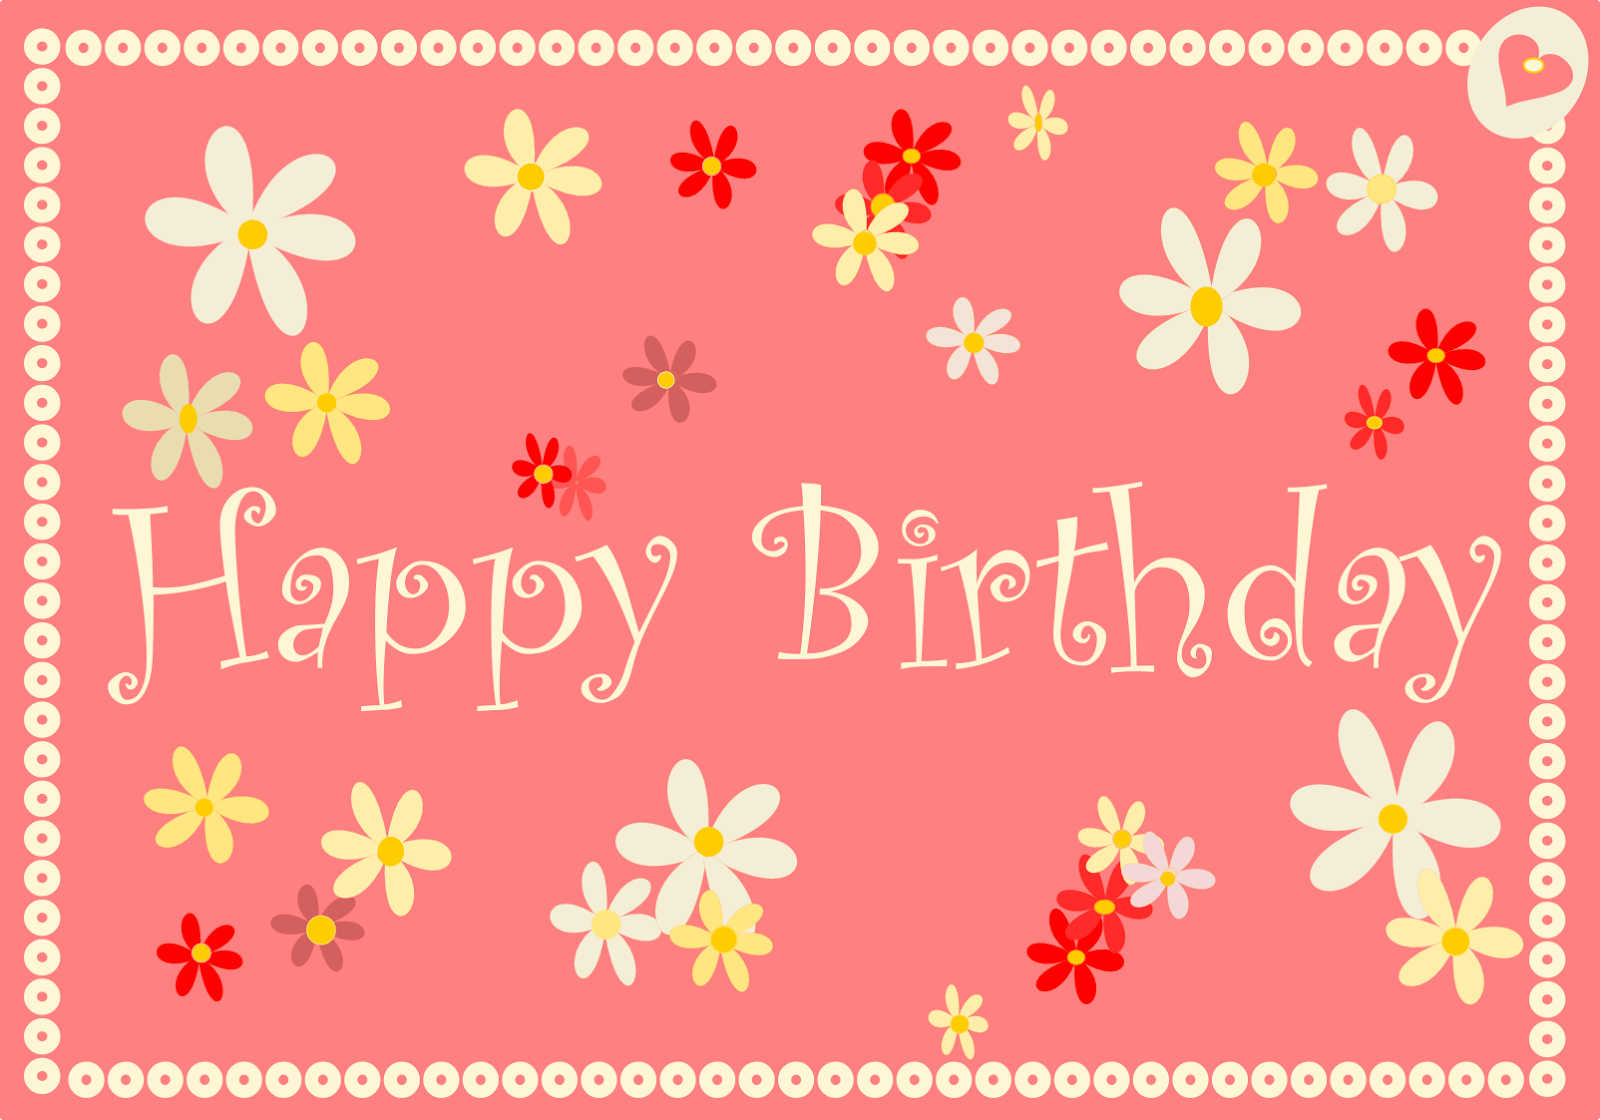 35 Happy Birthday Cards Free To Download  The WoW Style